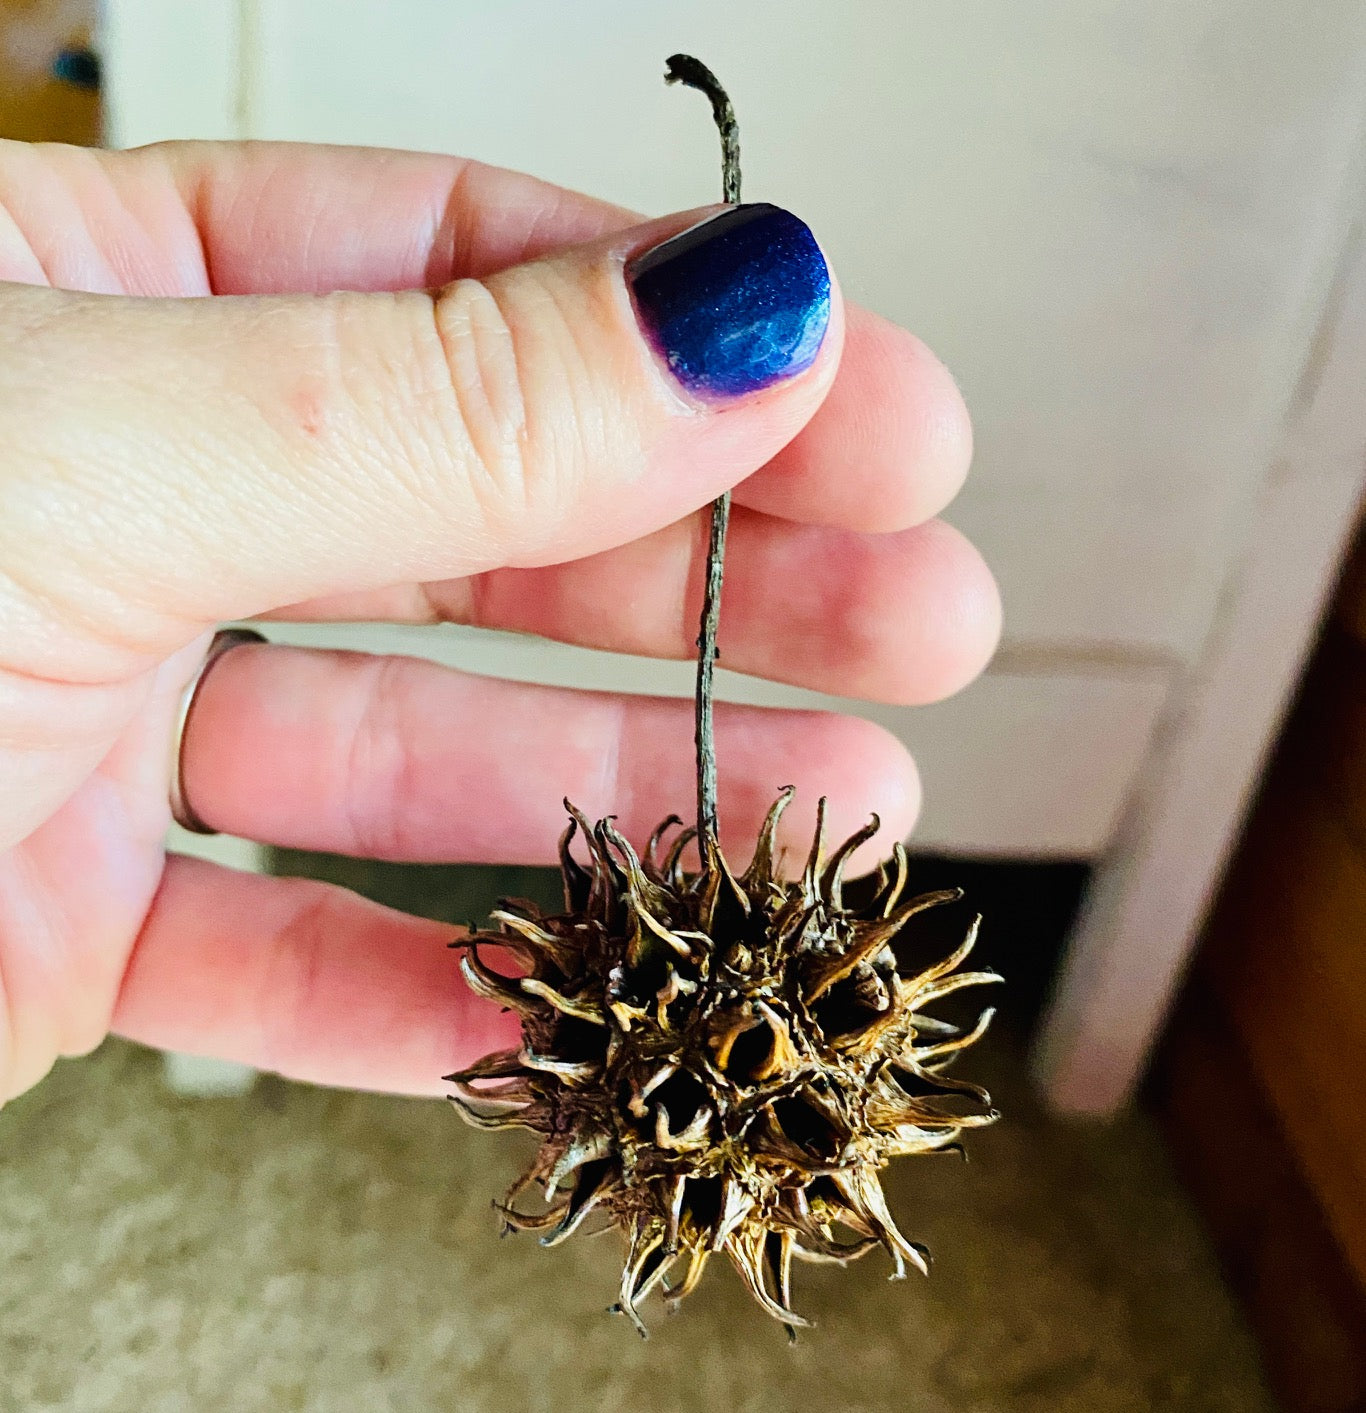 Sweet Gum Balls/Witches Burrs